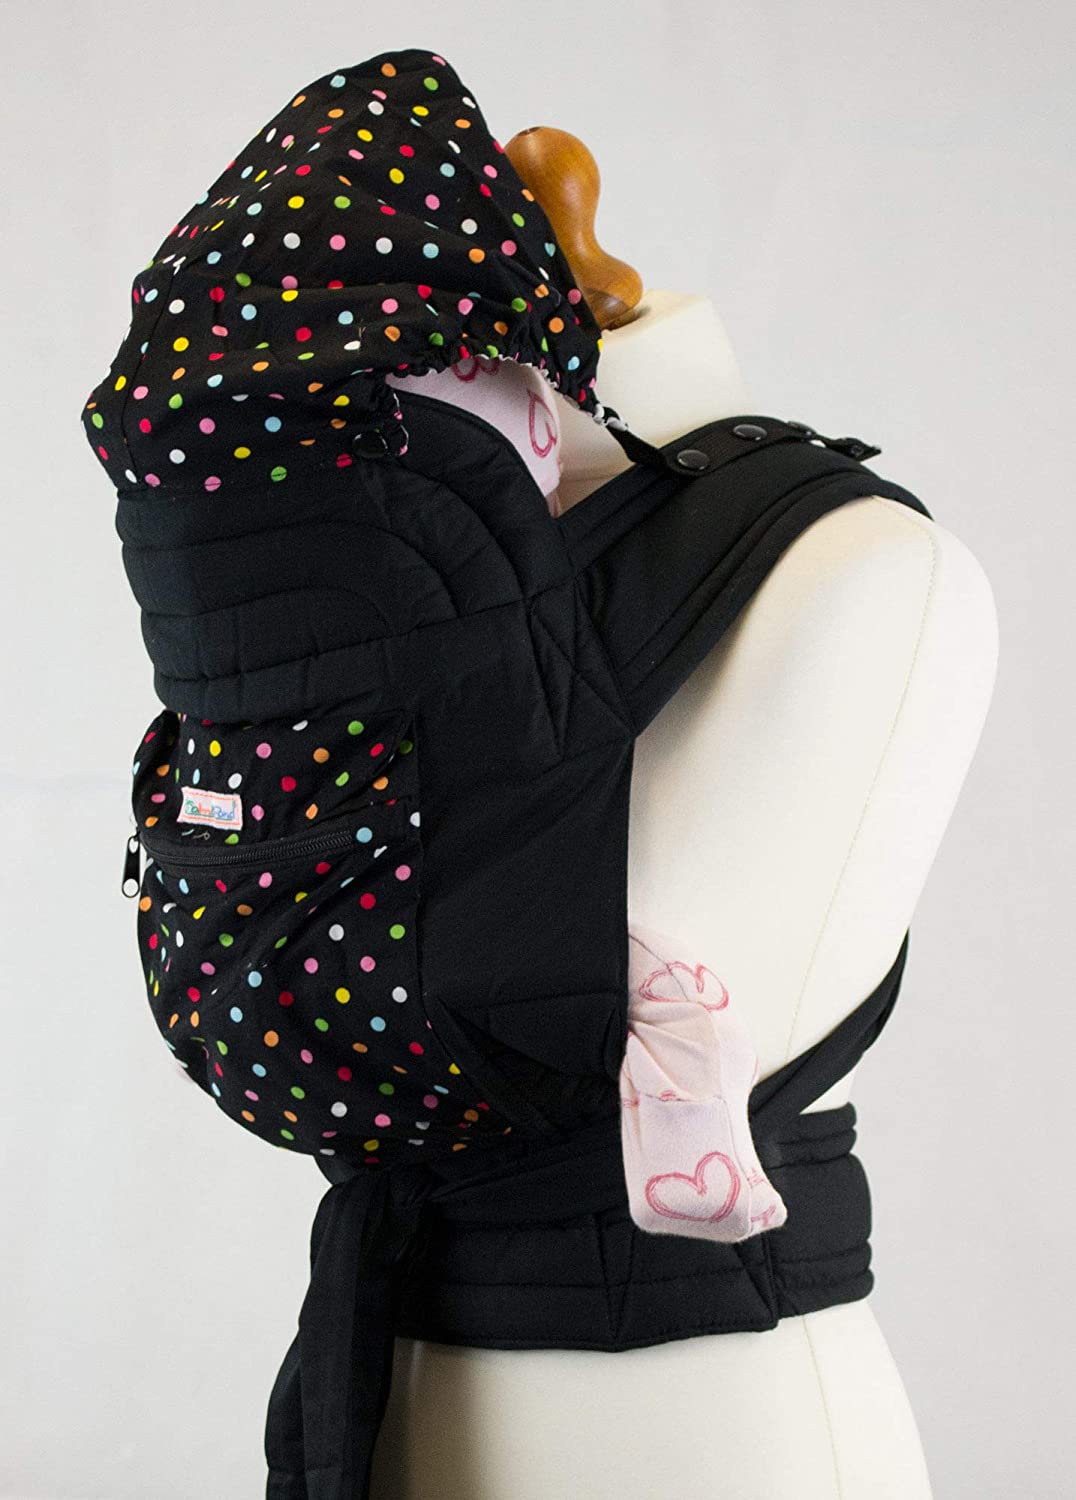 Palm and Pond Mei Tai Baby Carrier with Hood and Pocket – Black With White Polka Dot Design